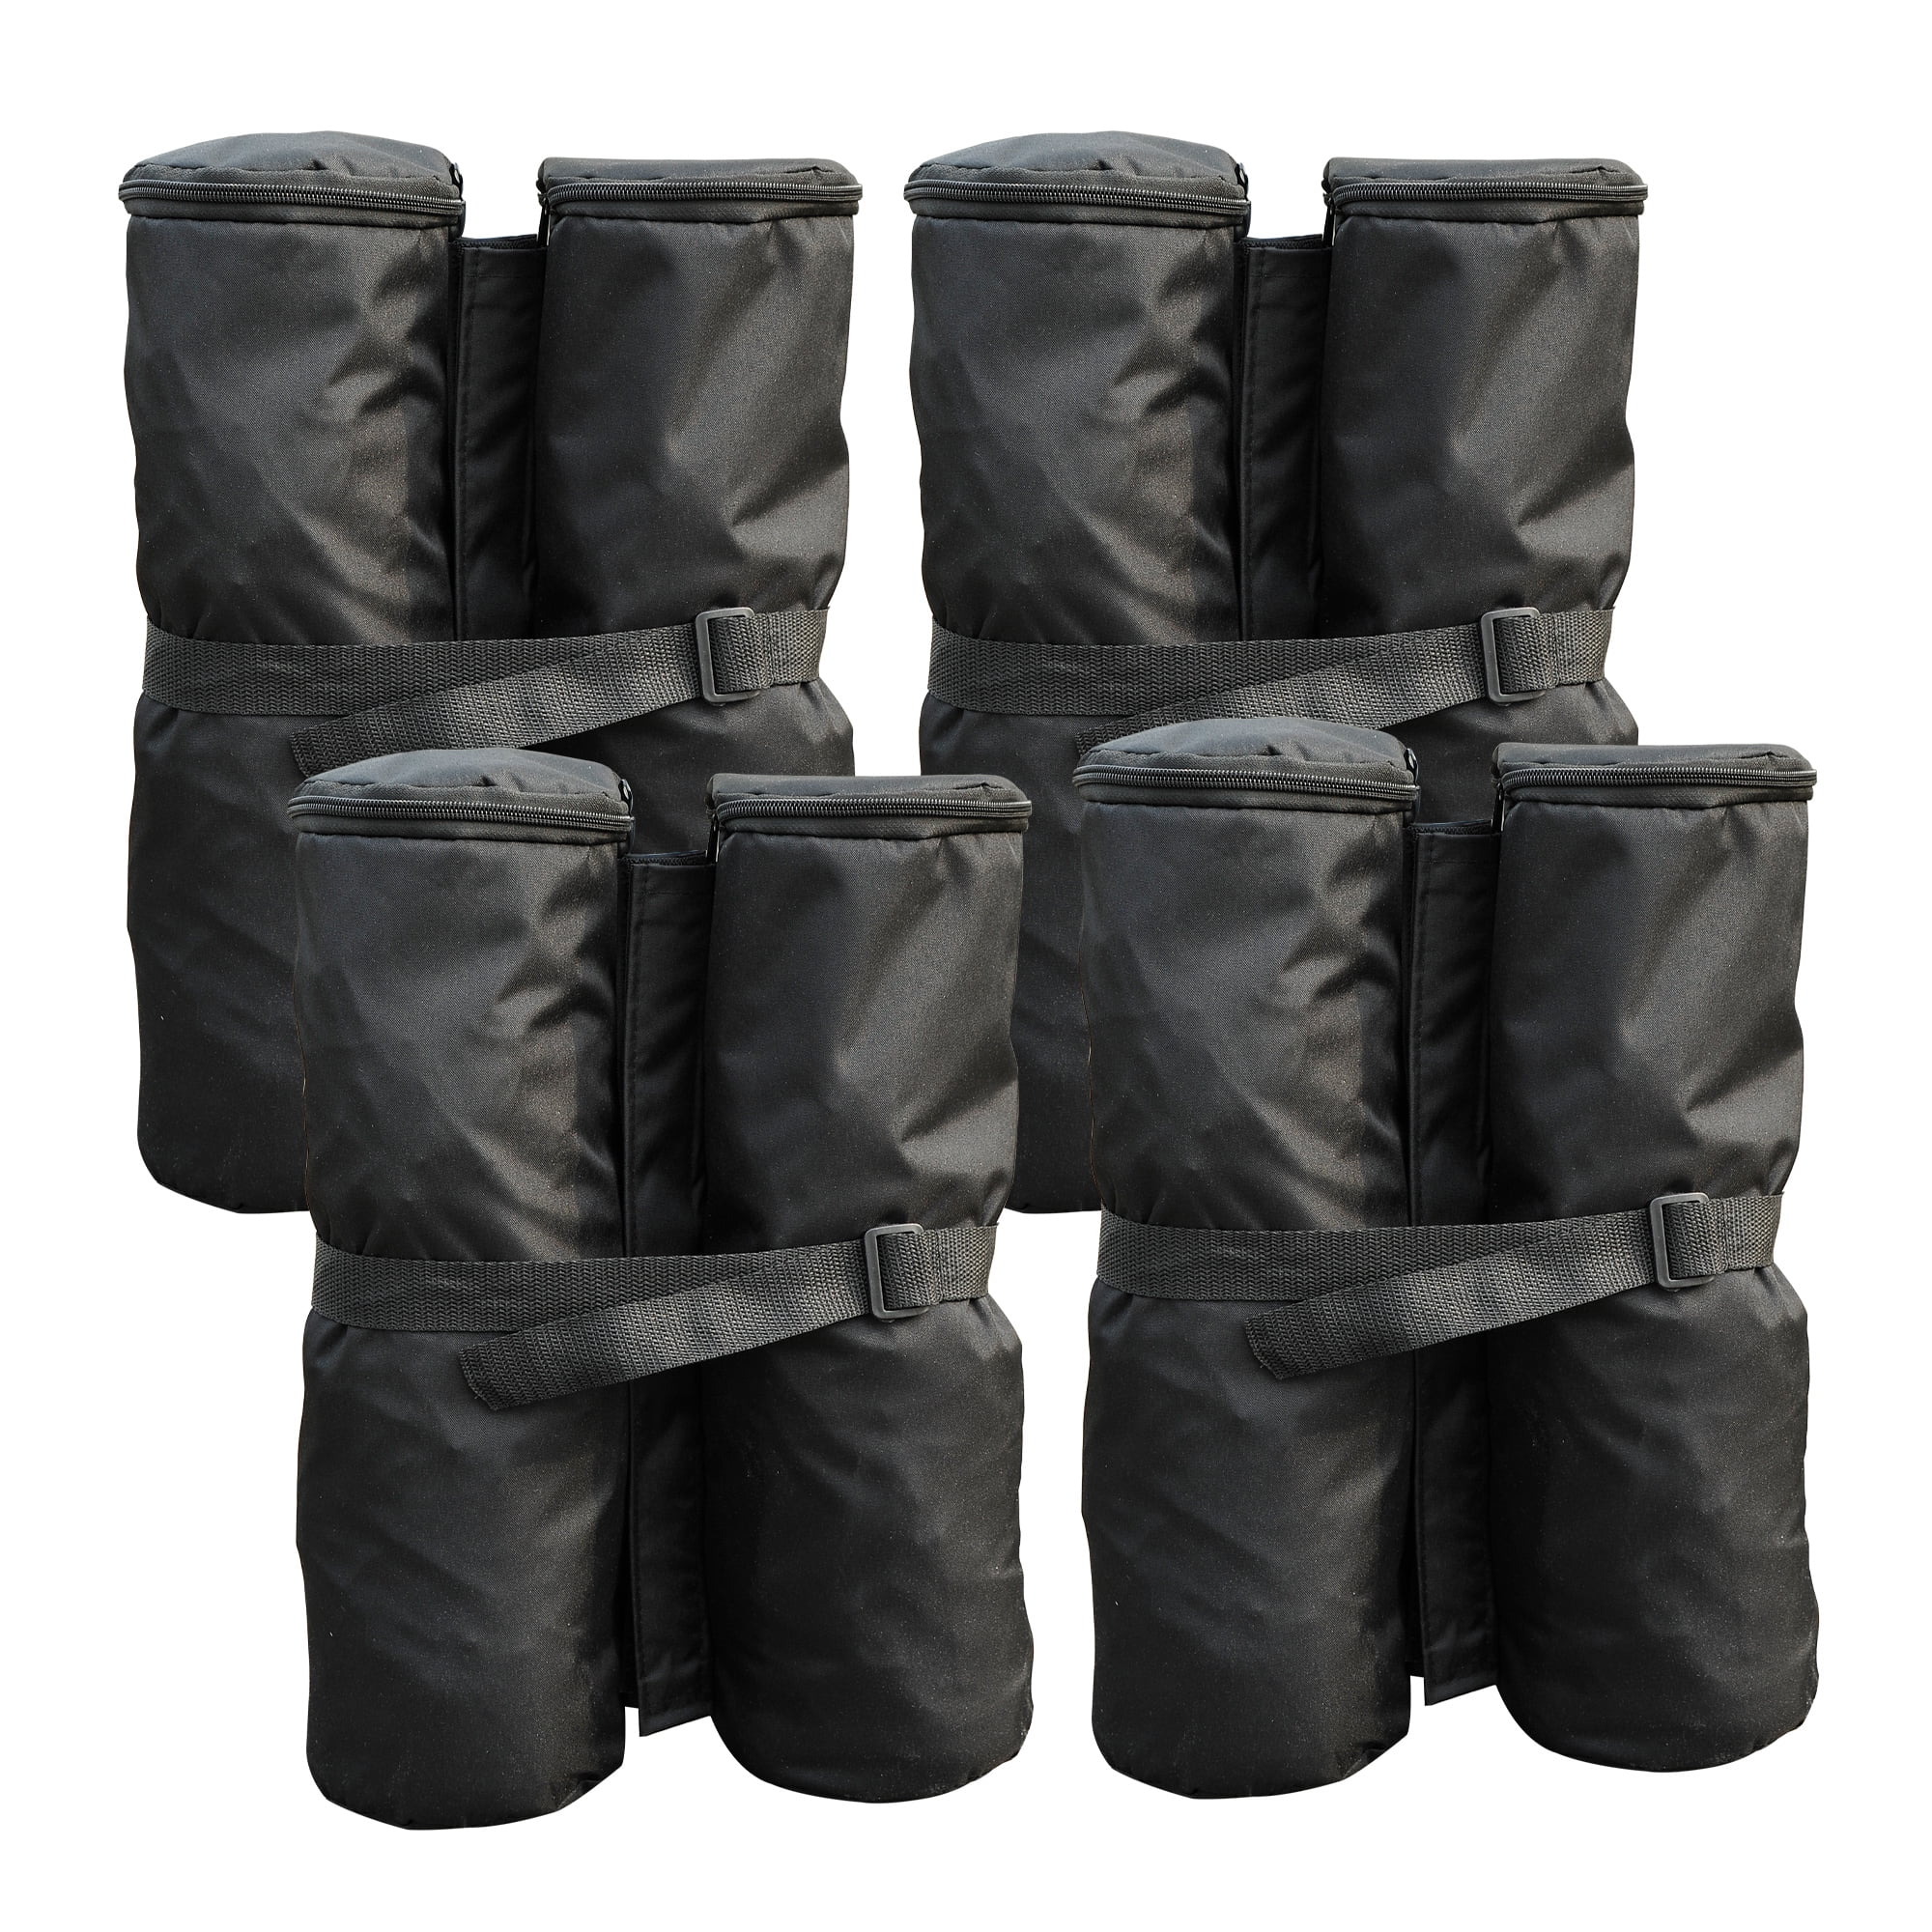 E-Z Up® Deluxe Weight Bags - 4 pack Canopy/Shelter weight bags, 45